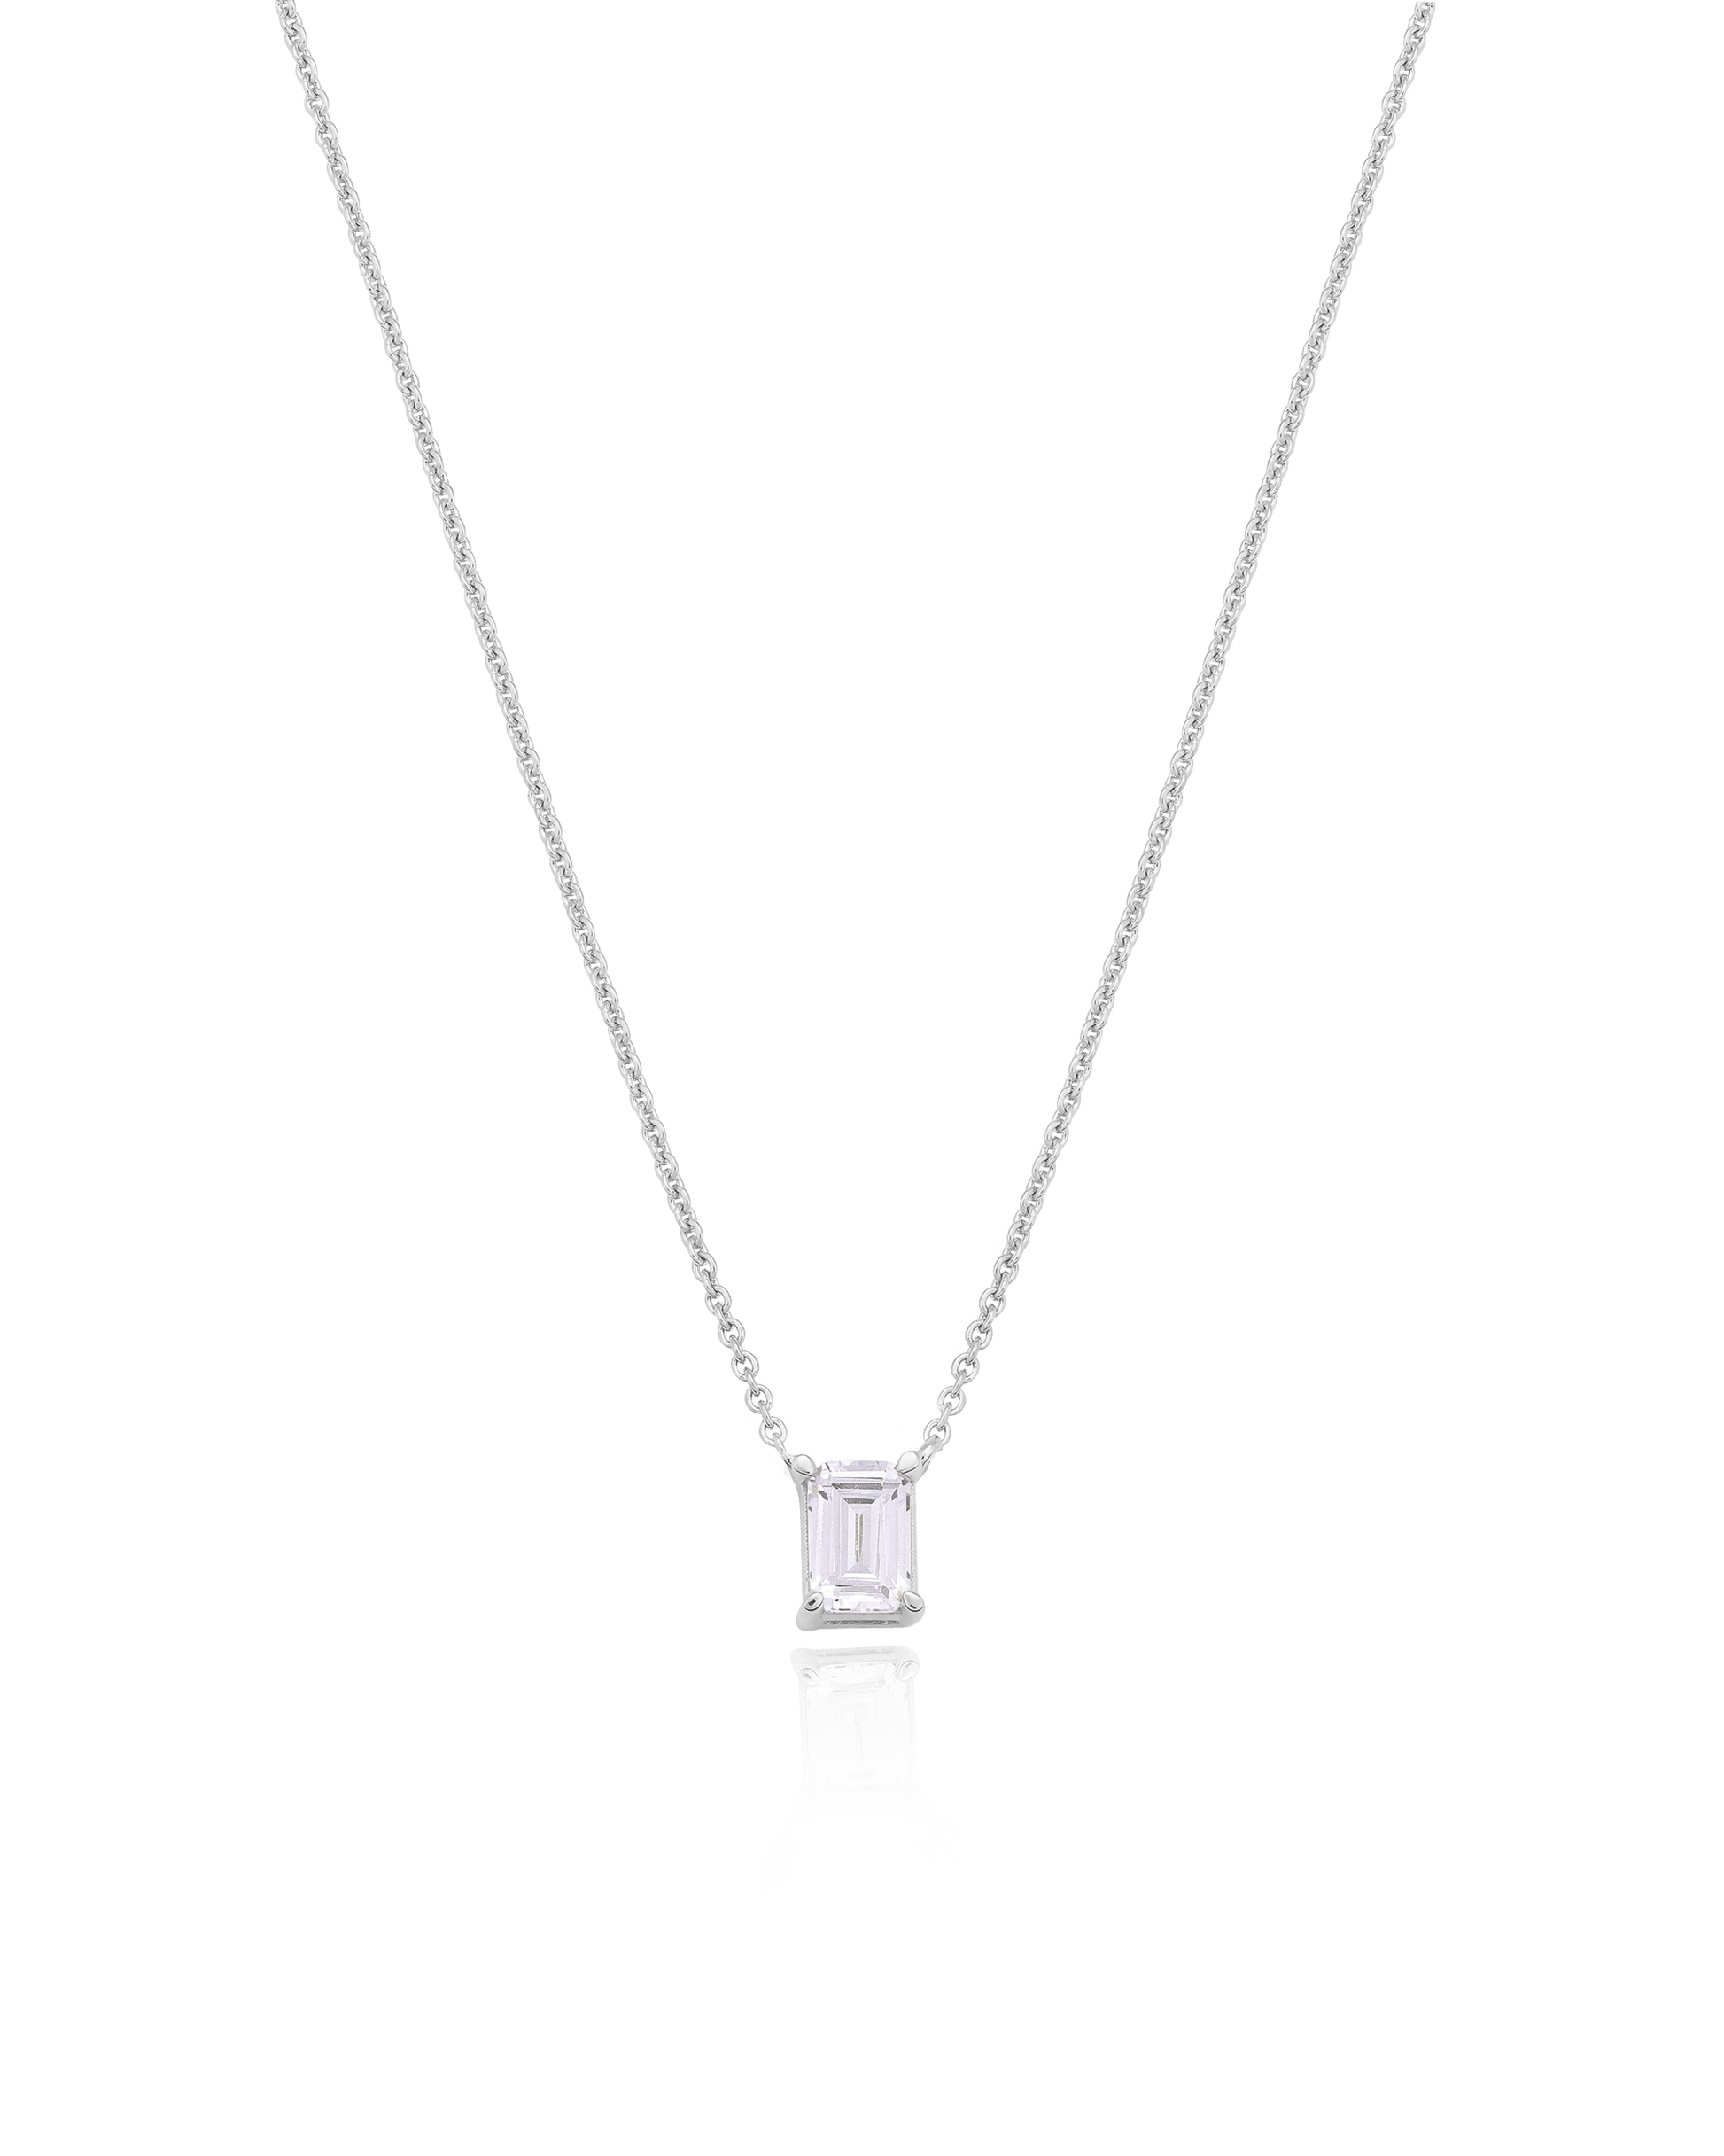 Emerald Solitaire Diamond Necklace - 14K White Gold Necklaces magal-dev 0.10 CT 16” 